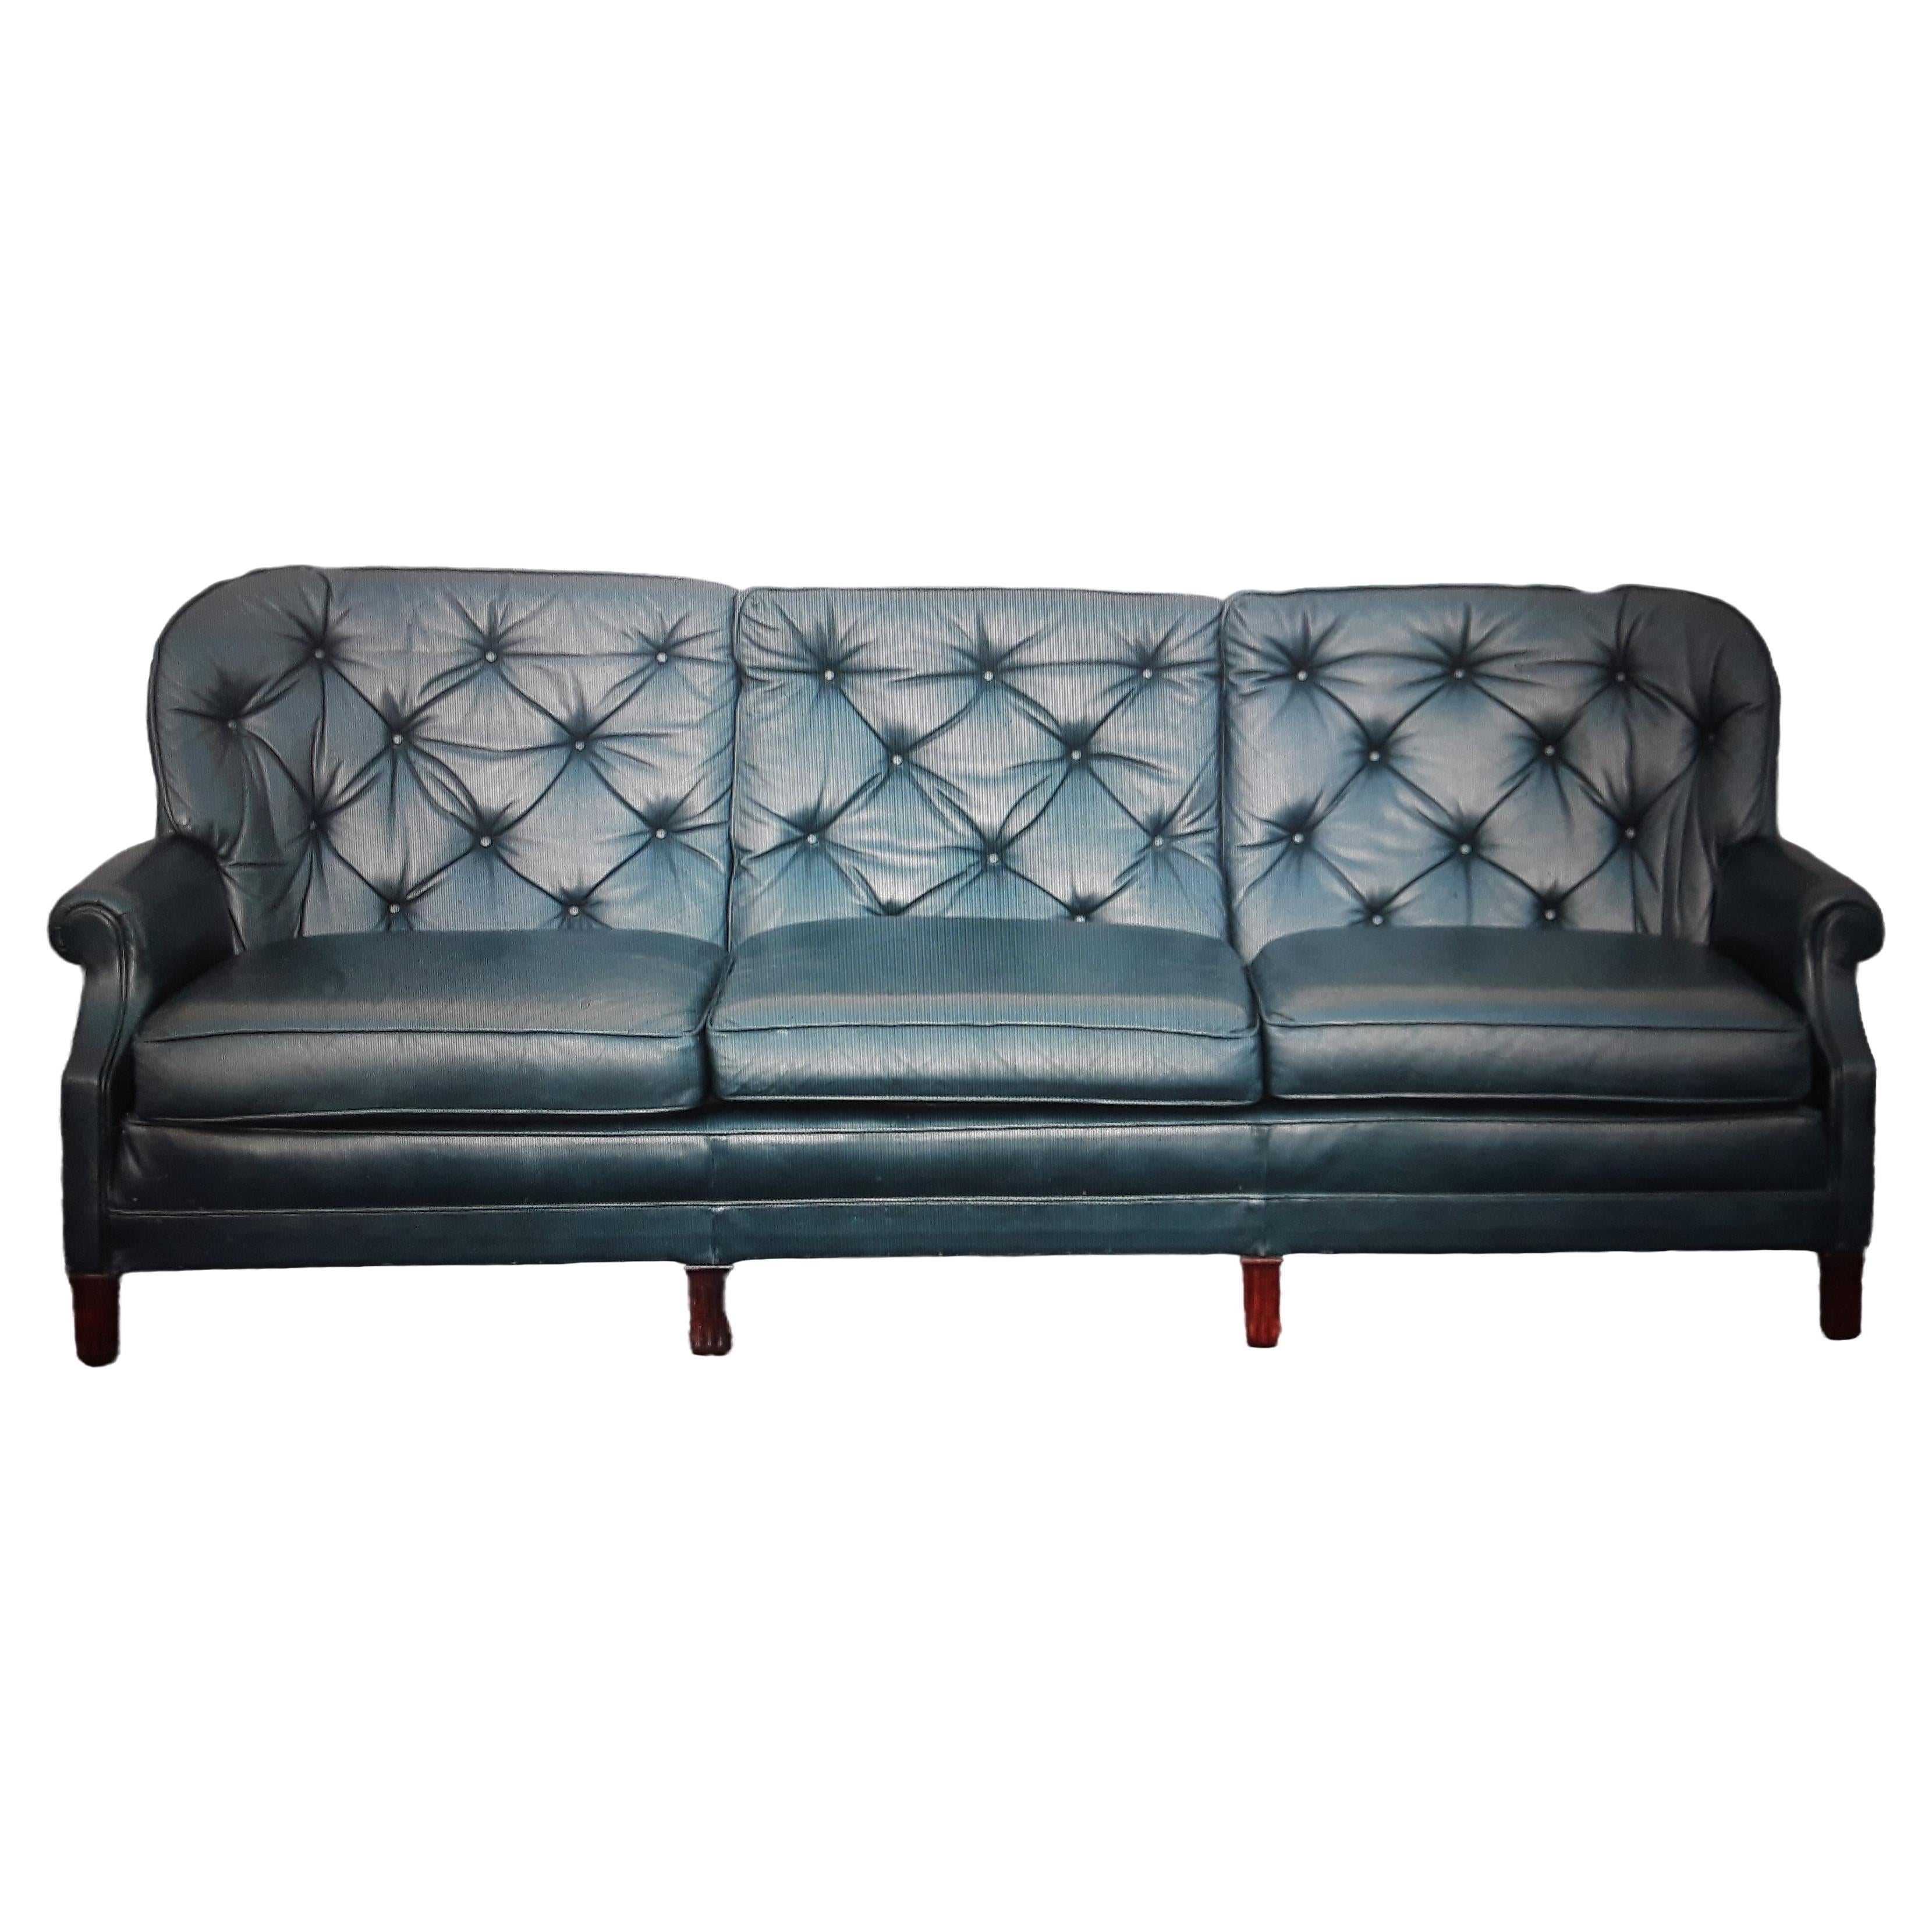 1960's Classic Mid Century Modern Blue Leather Chesterfield style Sofa For Sale